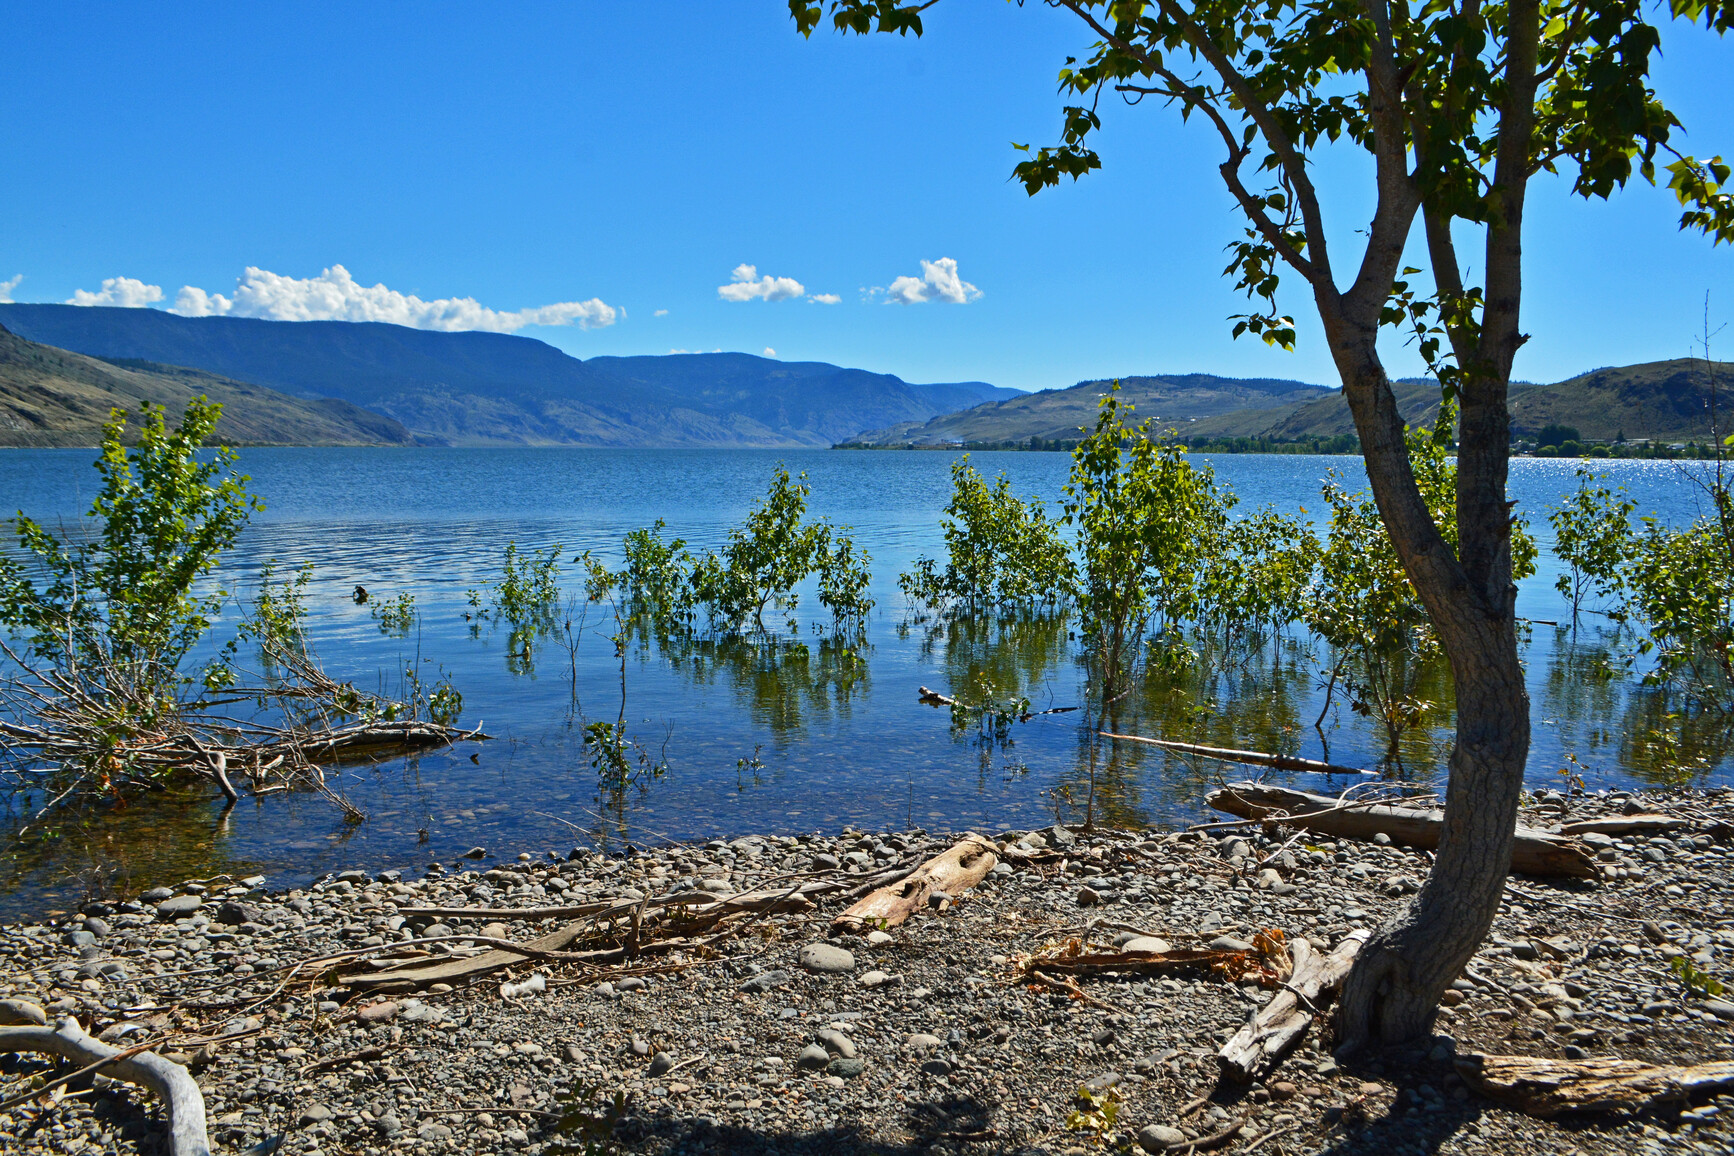 Kamloops Lake - Rocky beach with a tree, log and sticks on the shore. Shrubs in the foreground and forested mountains in the background.